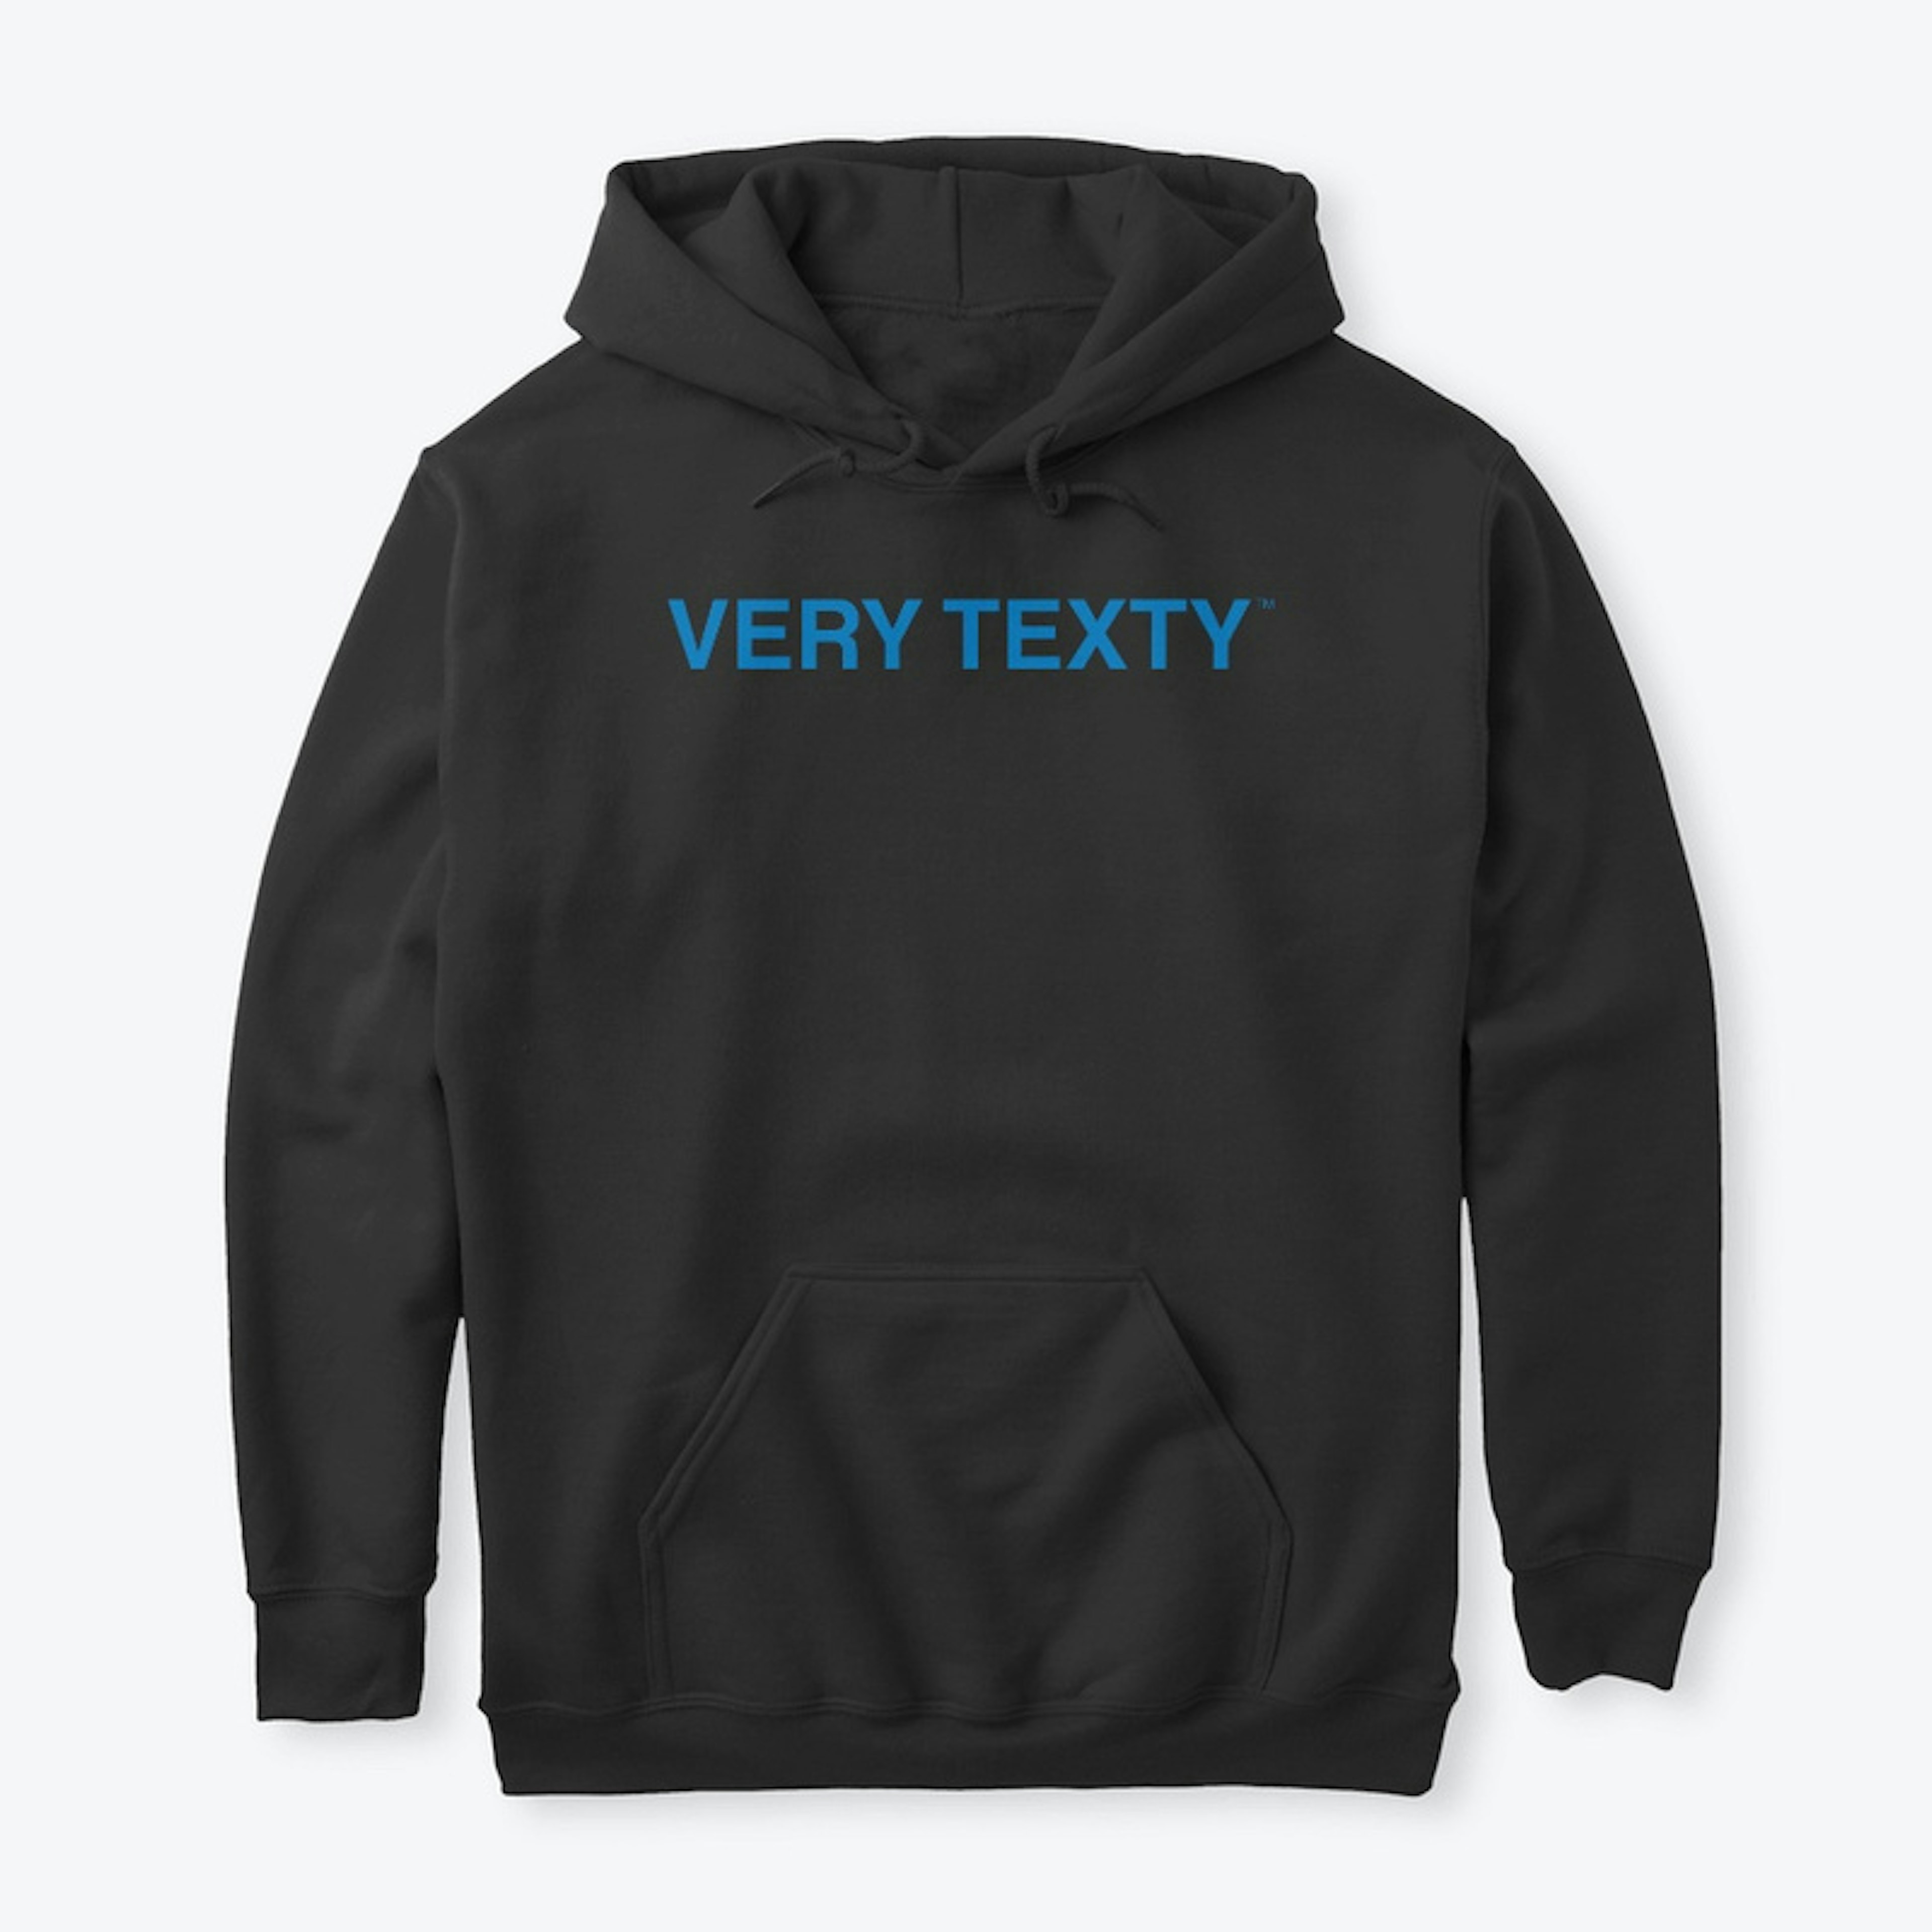 Very Texty Hoodie With Graphic on Back